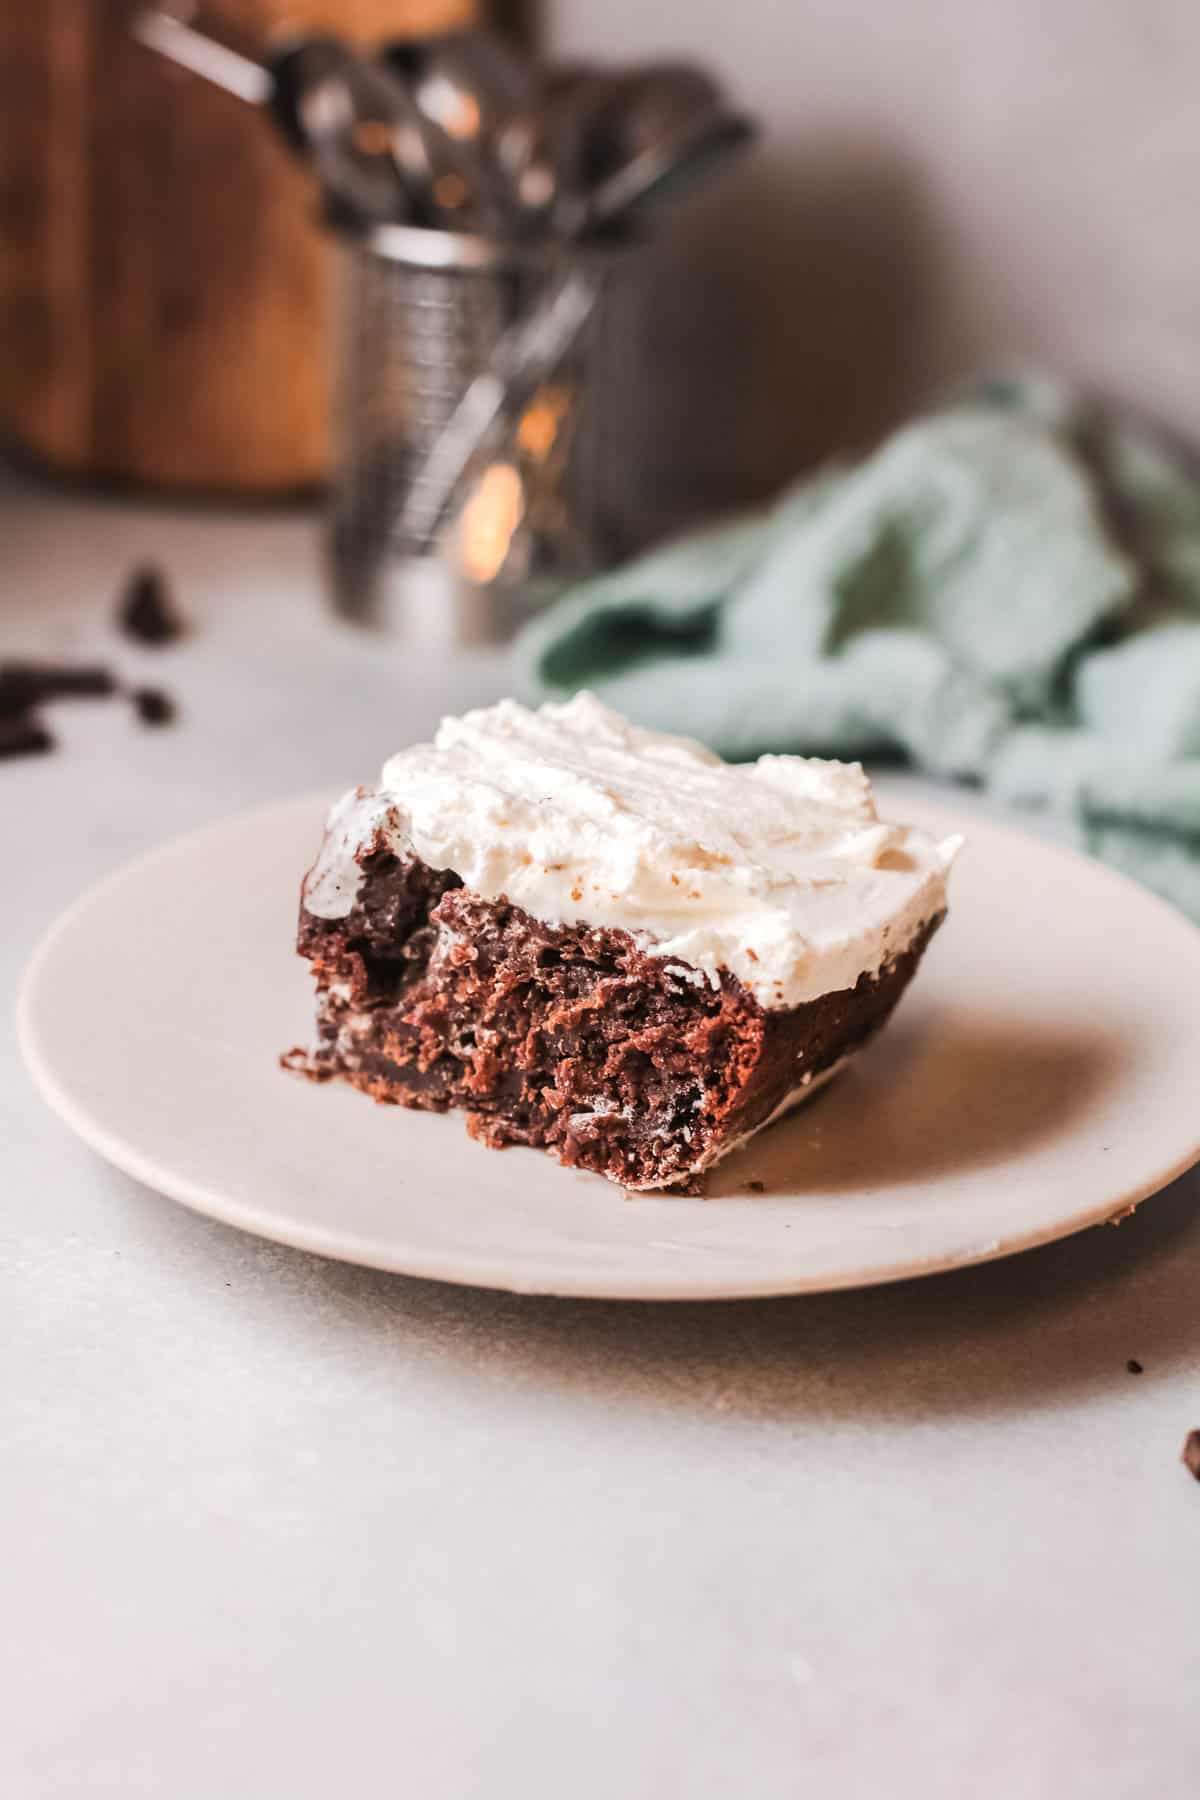 A piece of chocolate cake on a plate topped with white frosting.